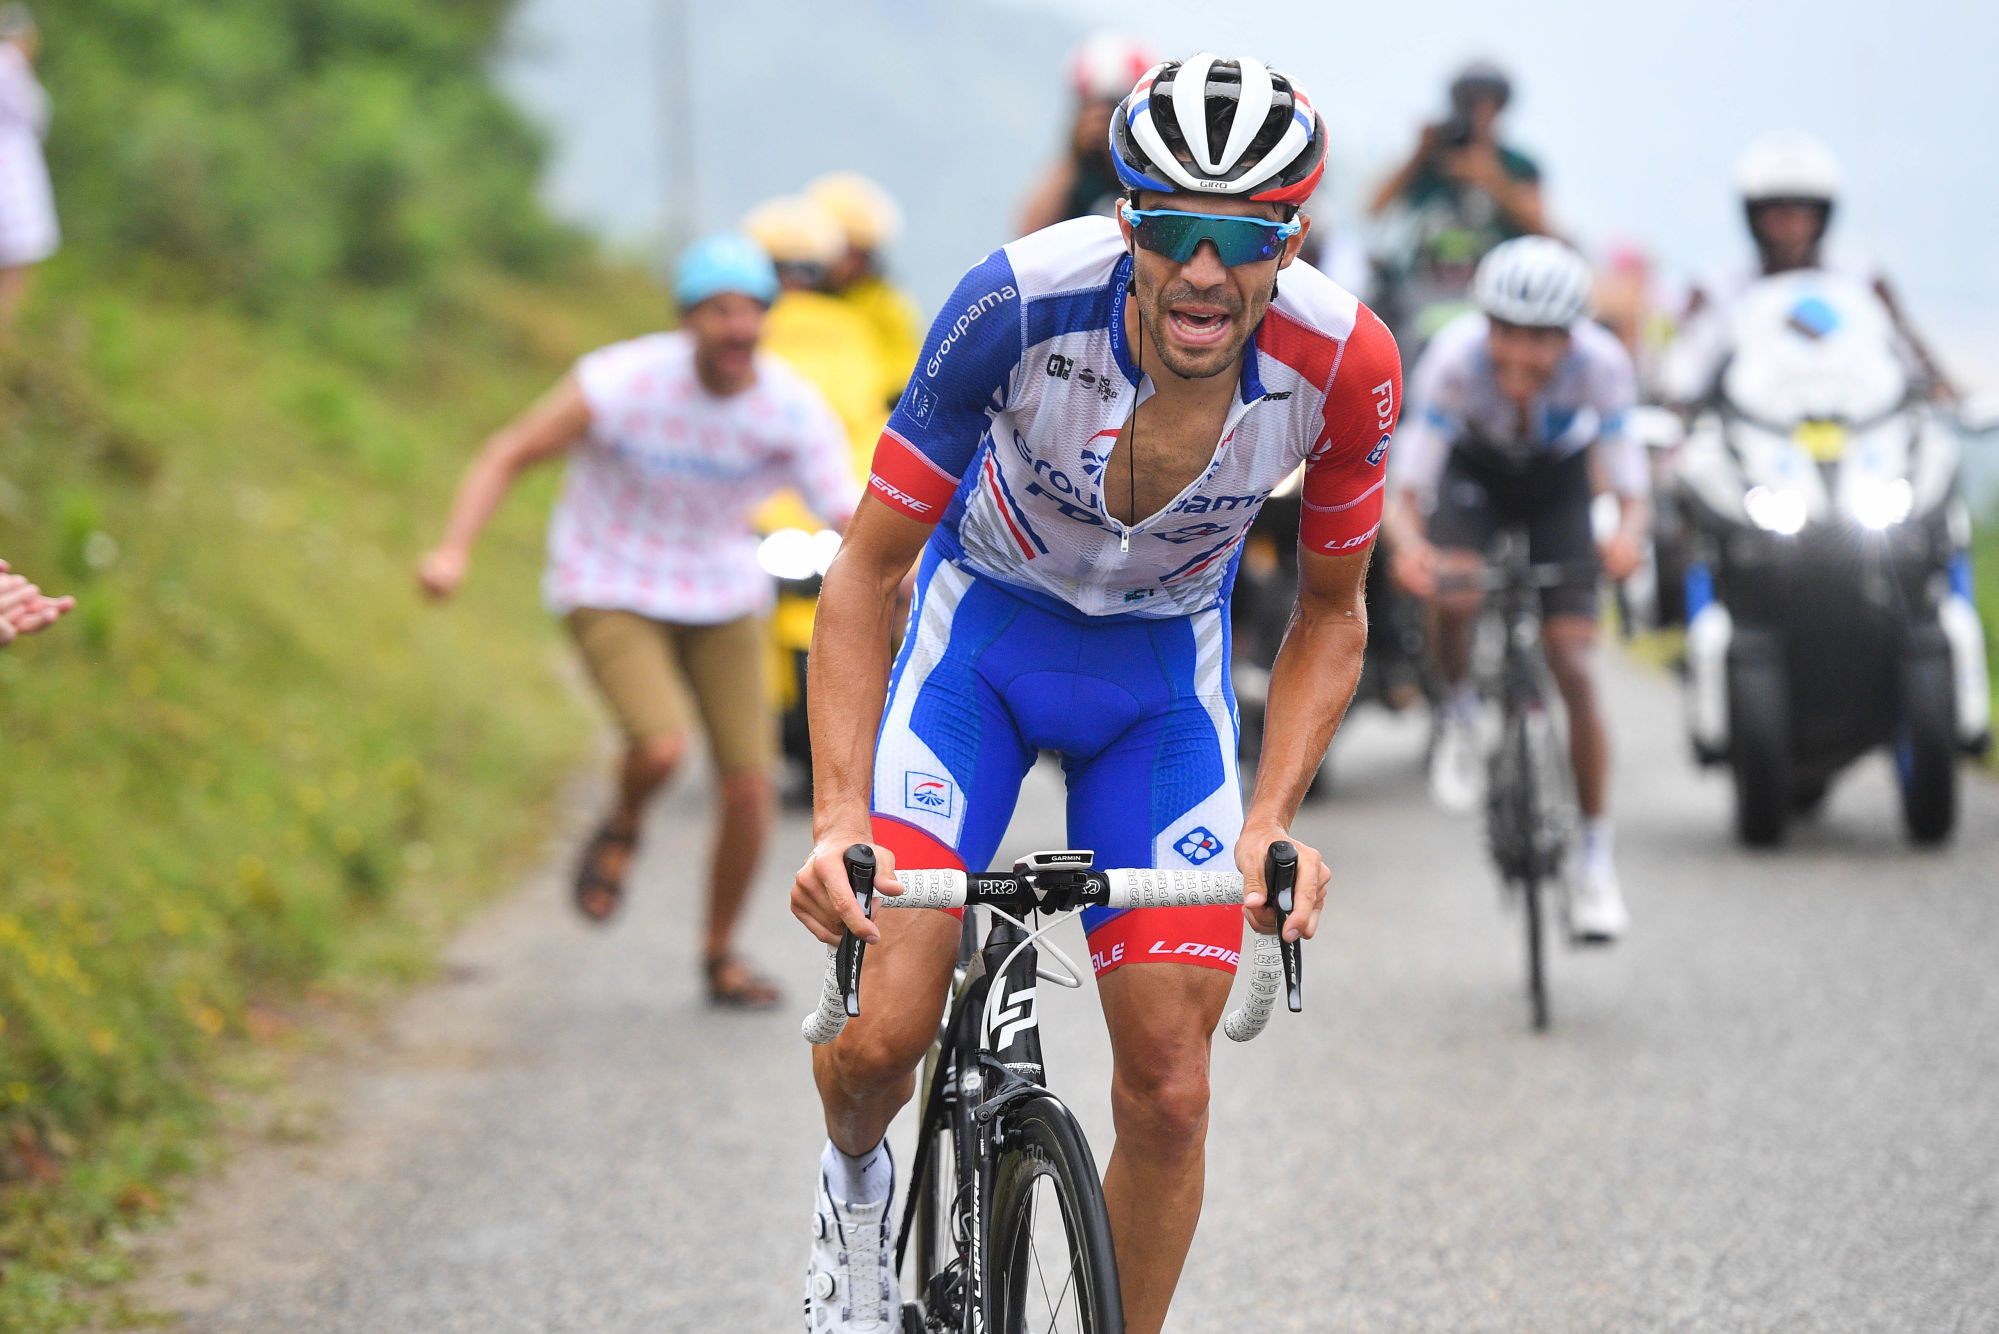 French Thibaut Pinot of Groupama-FDJ rides the stage 15 of the 106th edition of the Tour de France cycling race, from  Limoux to Foix Prat d'Albis (185km), in France, Sunday 21 July 2019. This year's Tour de France starts in Brussels and takes place from July 6th to July 28th.
Photo: David Stockman / Belga / Icon Sport